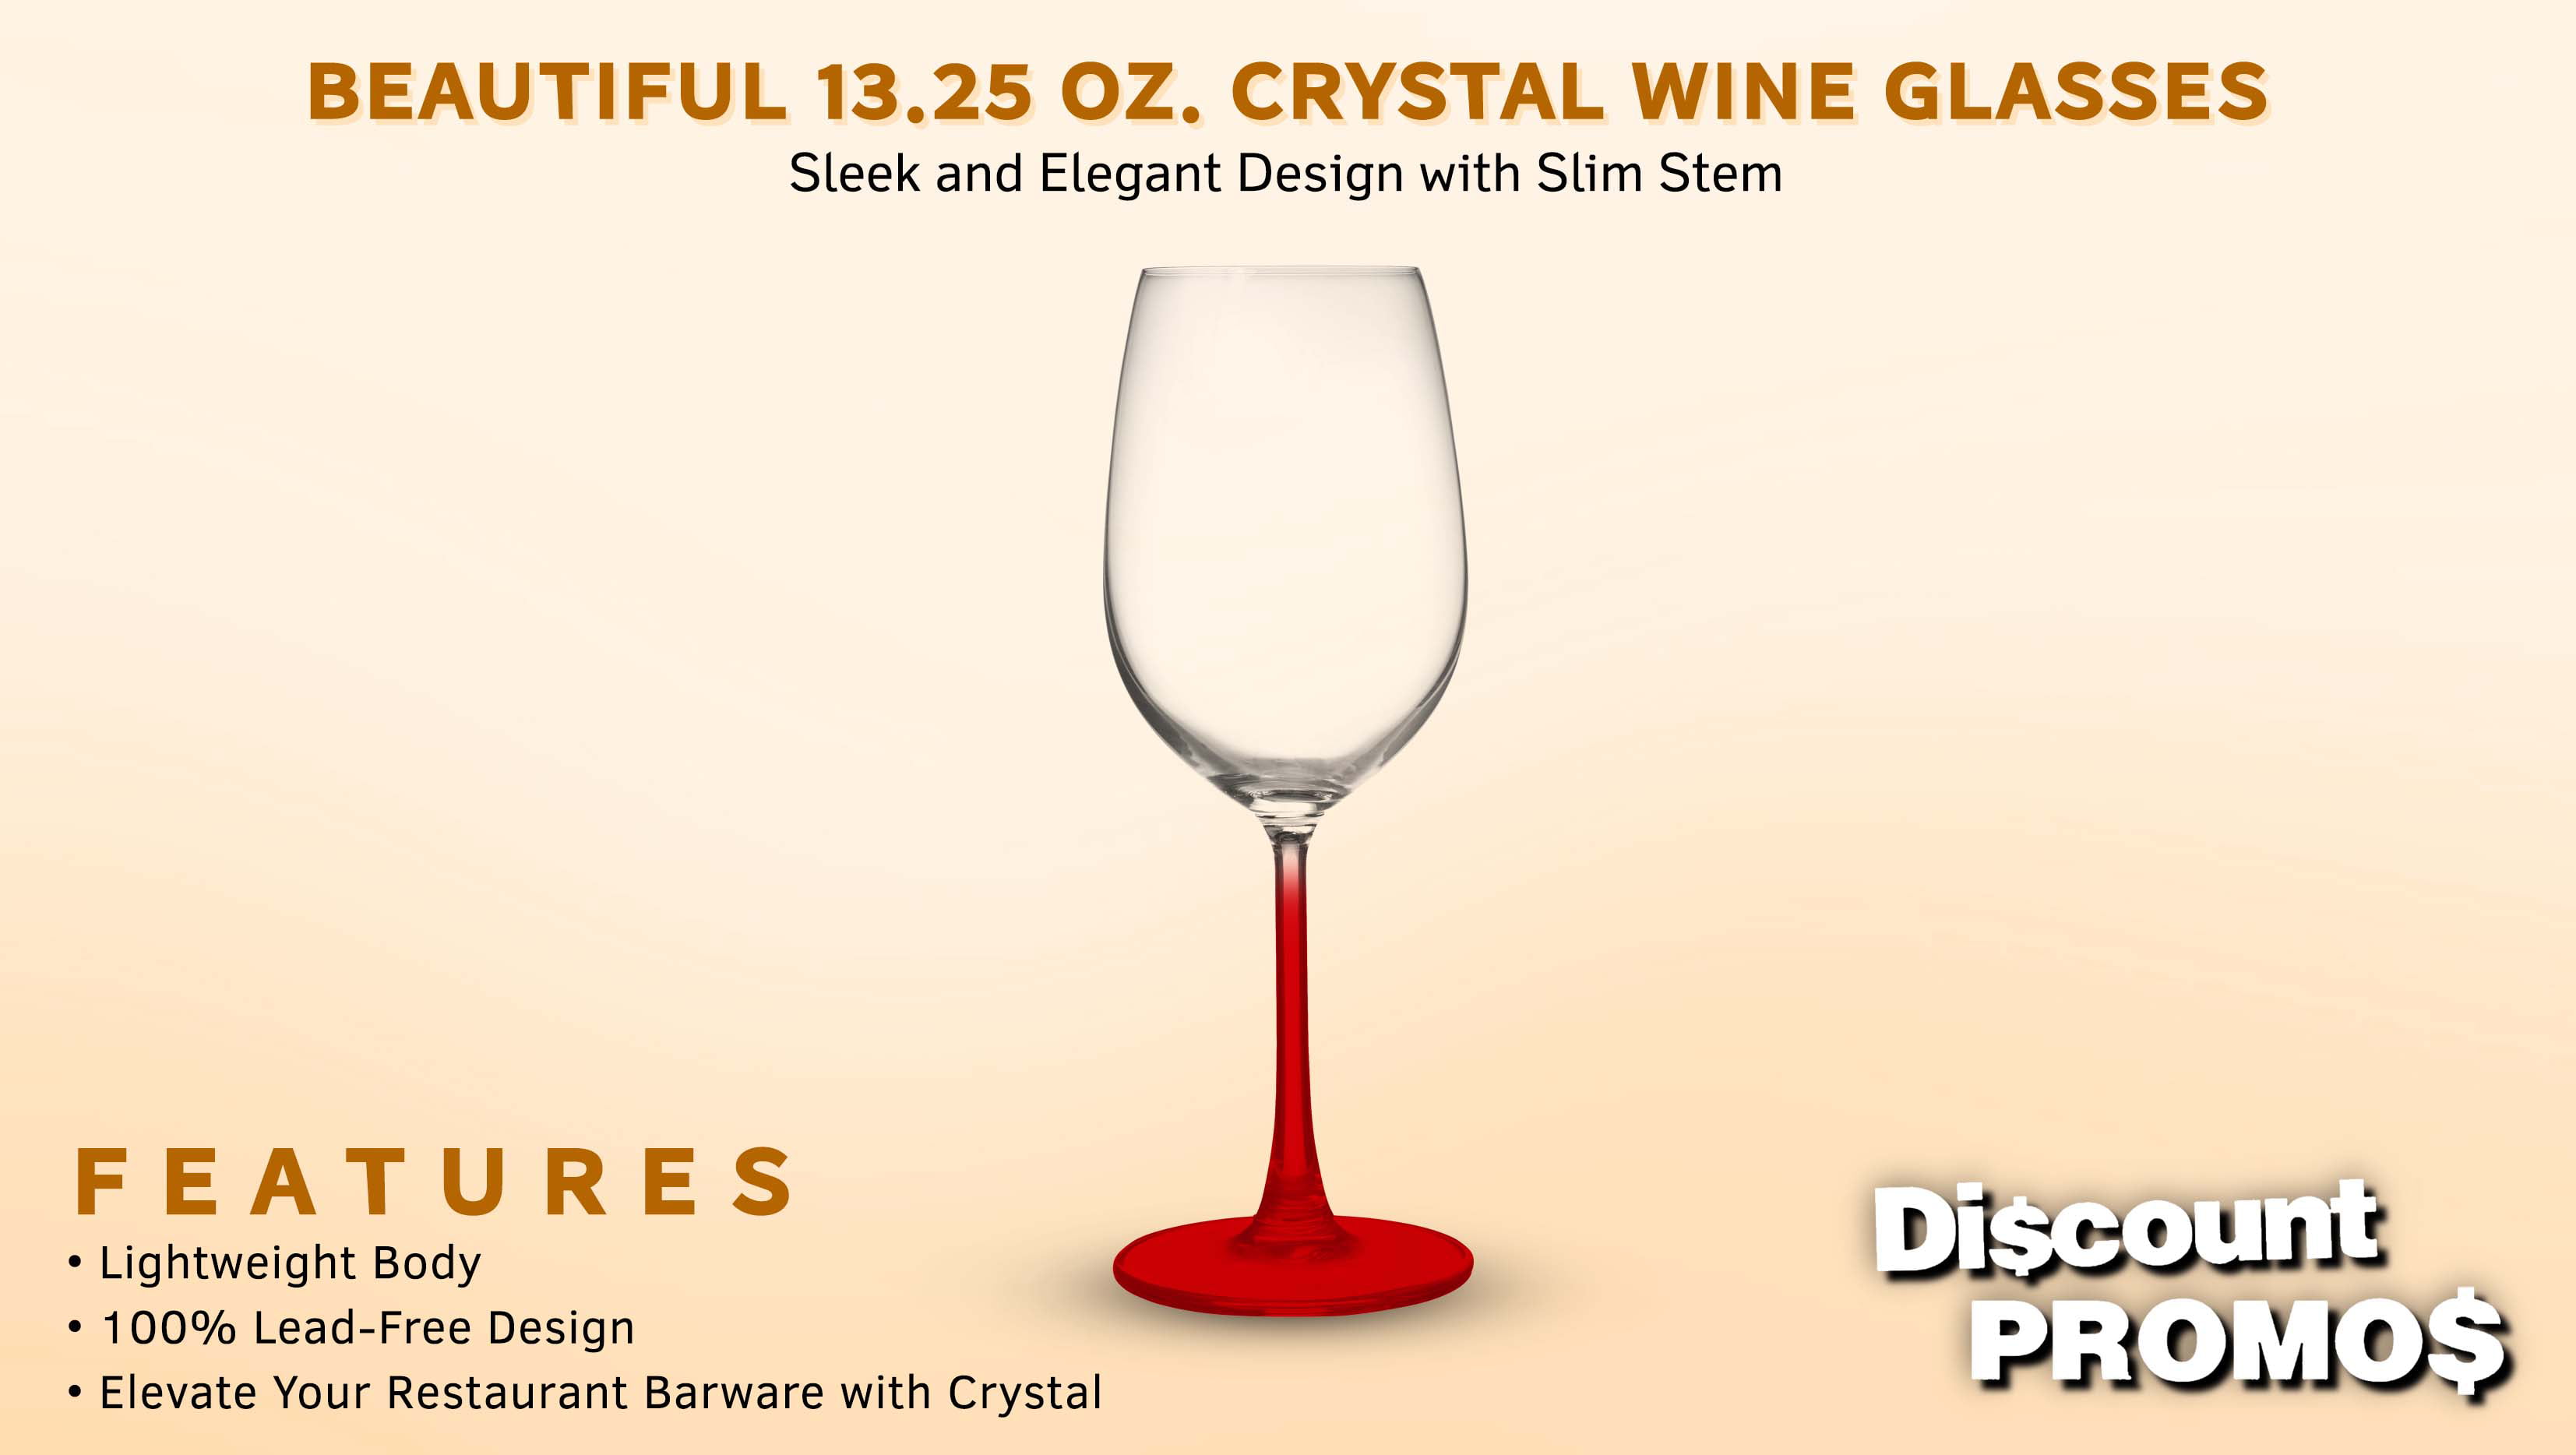 17oz Crystal Red Wine Glasses set of 2 Romantic Heart Shaped Wine Glasses  Creative Cocktail Drinking…See more 17oz Crystal Red Wine Glasses set of 2